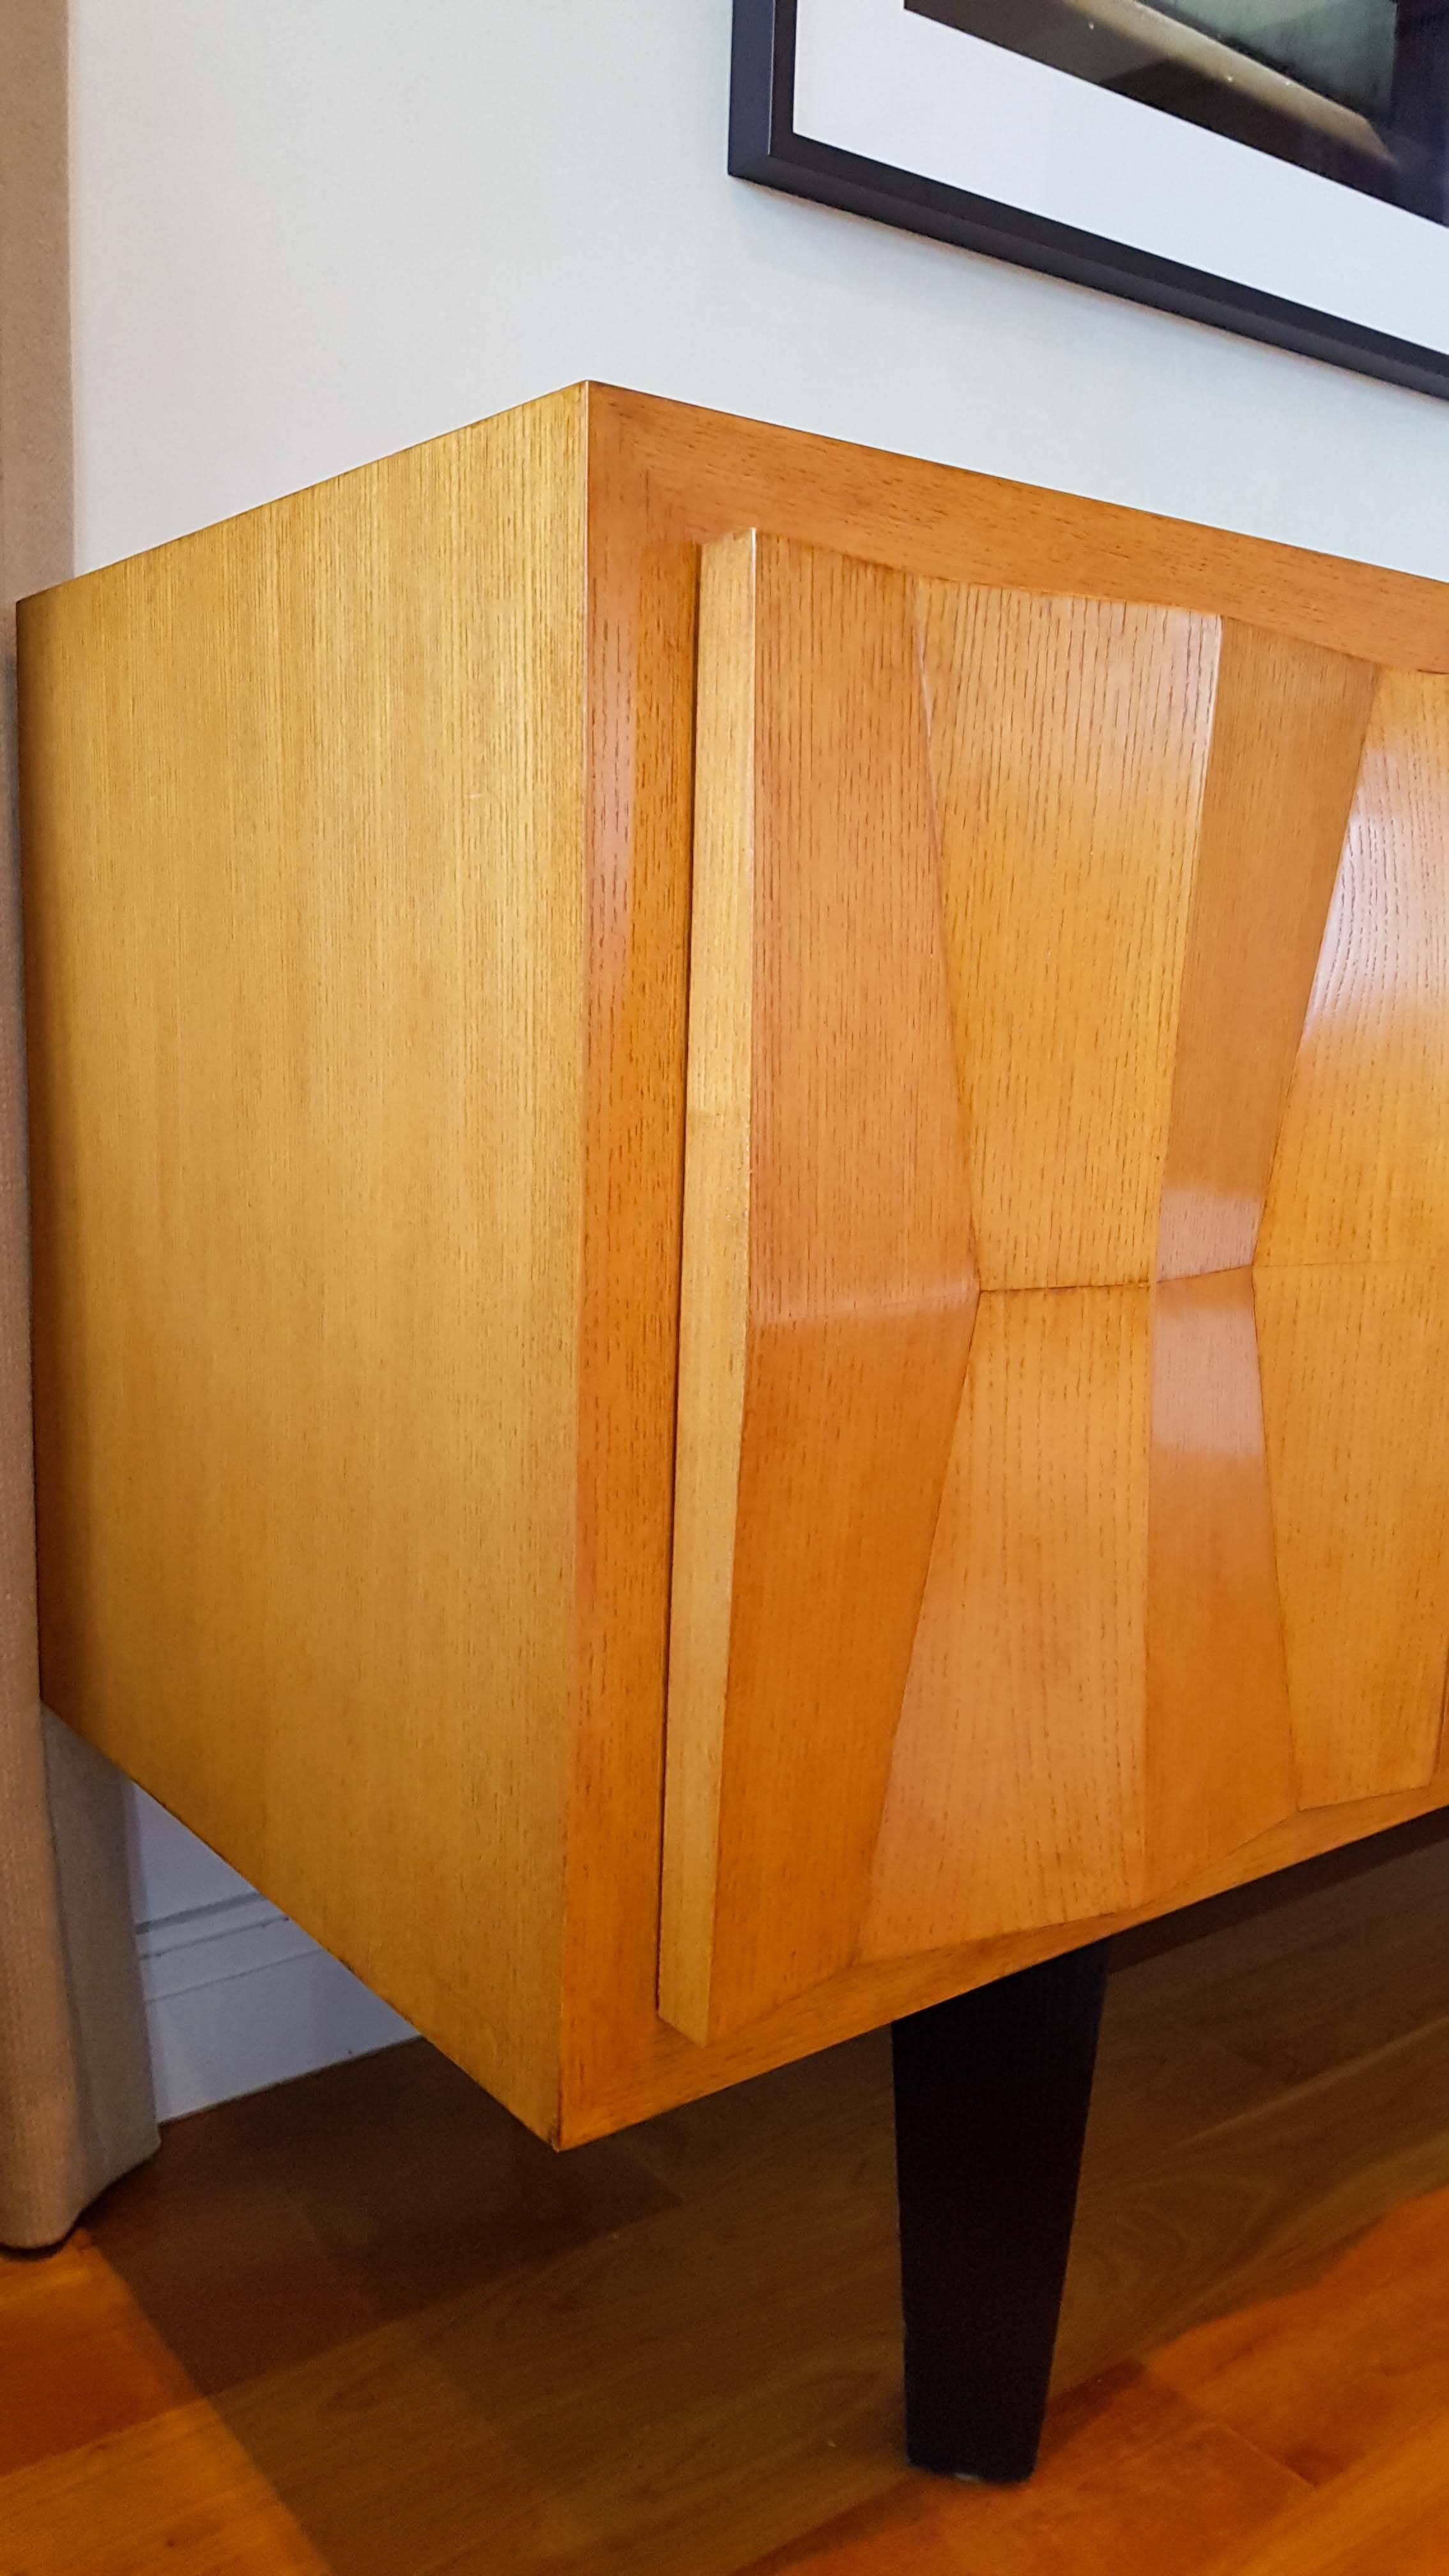 The Edo Credenza by Therien Studio Workshops. The case is made of ashwood and ashwood veneer and sits atop ebonized legs. Custom made for a private client in 2004, in excellent overall condition with minor wear consistent with occasional use.